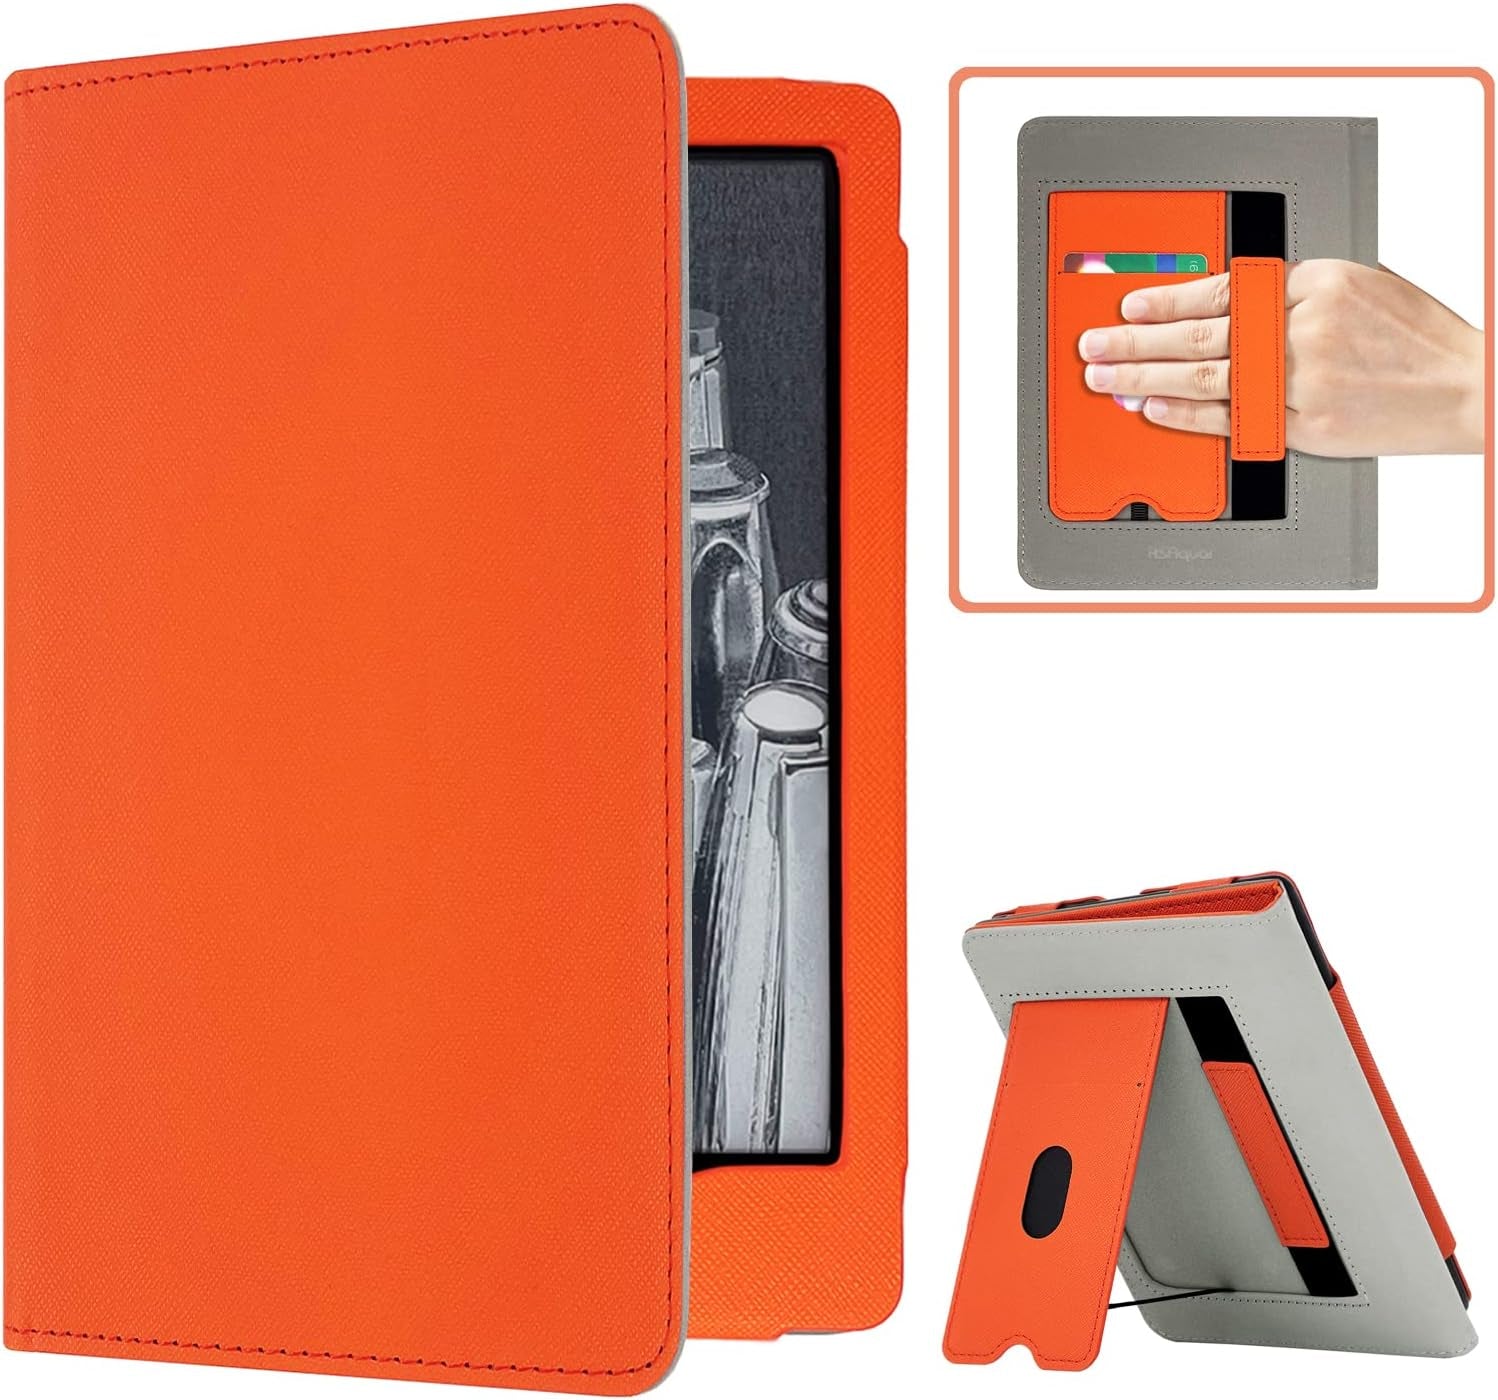 Kindle Paperwhite Case for 11Th Generation 6.8" and Signature Edition 2021 Released, Premium PU Leather Cover with Auto Sleep Wake, Hand Strap, Card Slot and Foldable Stand, Orange